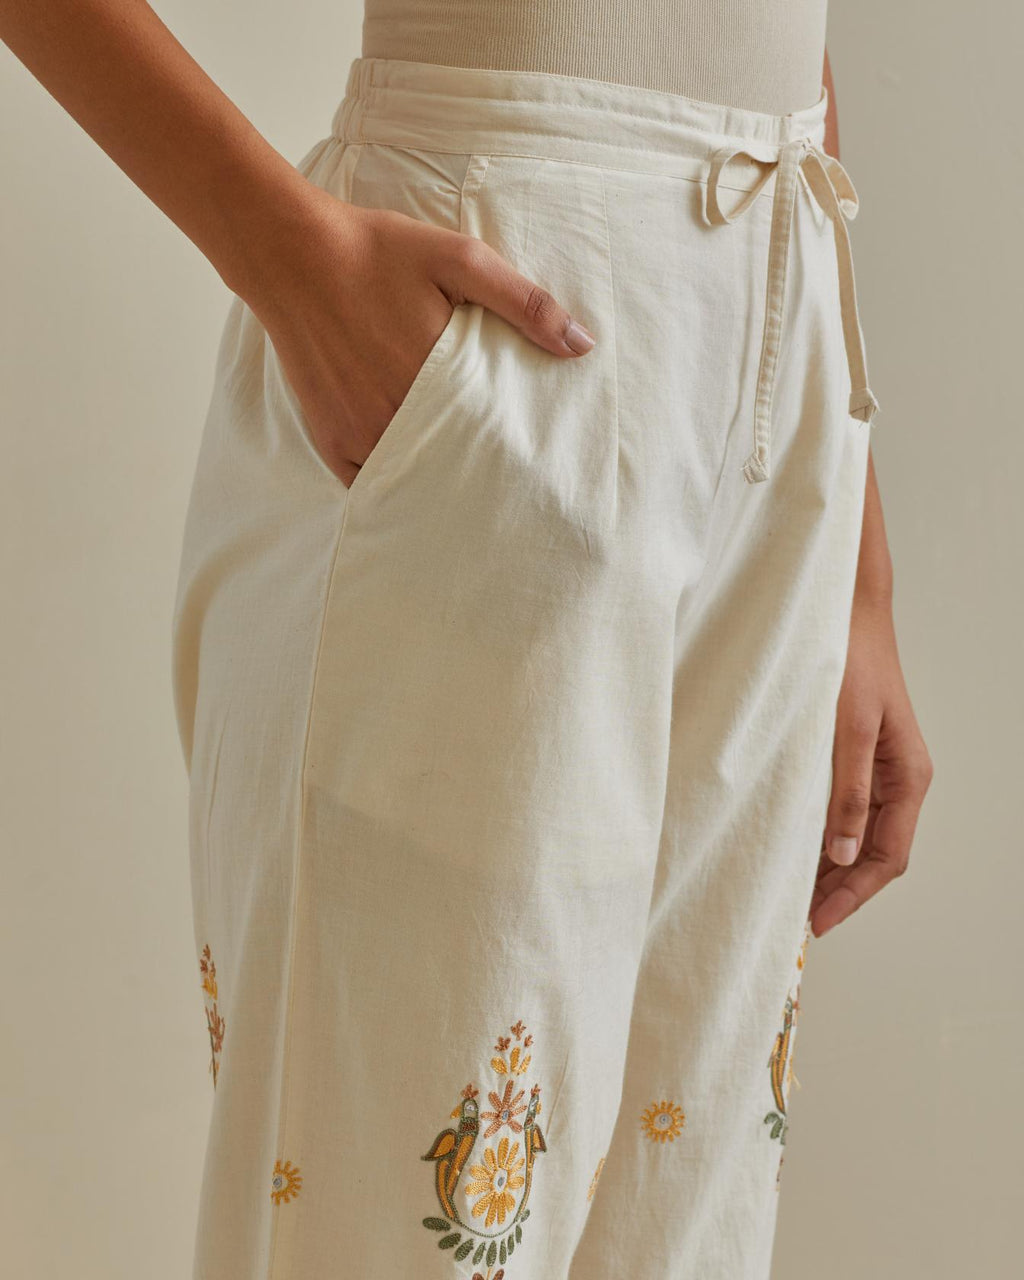 Yellow and off-white straight pants with all over multi color embroidery detailed with sequins.